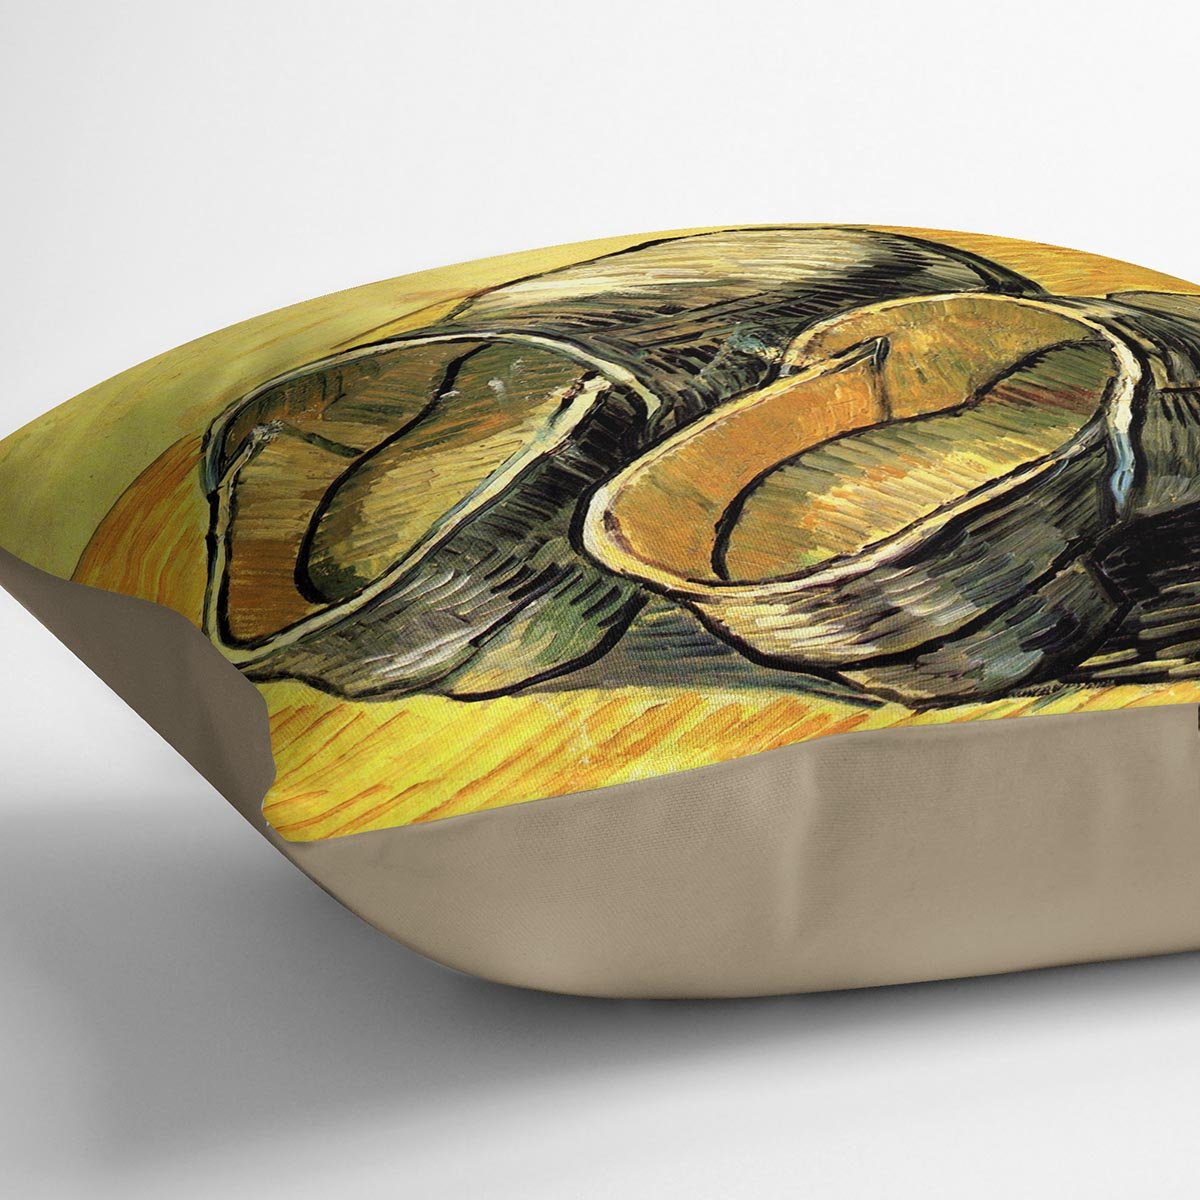 A Pair of Leather Clogs by Van Gogh Throw Pillow